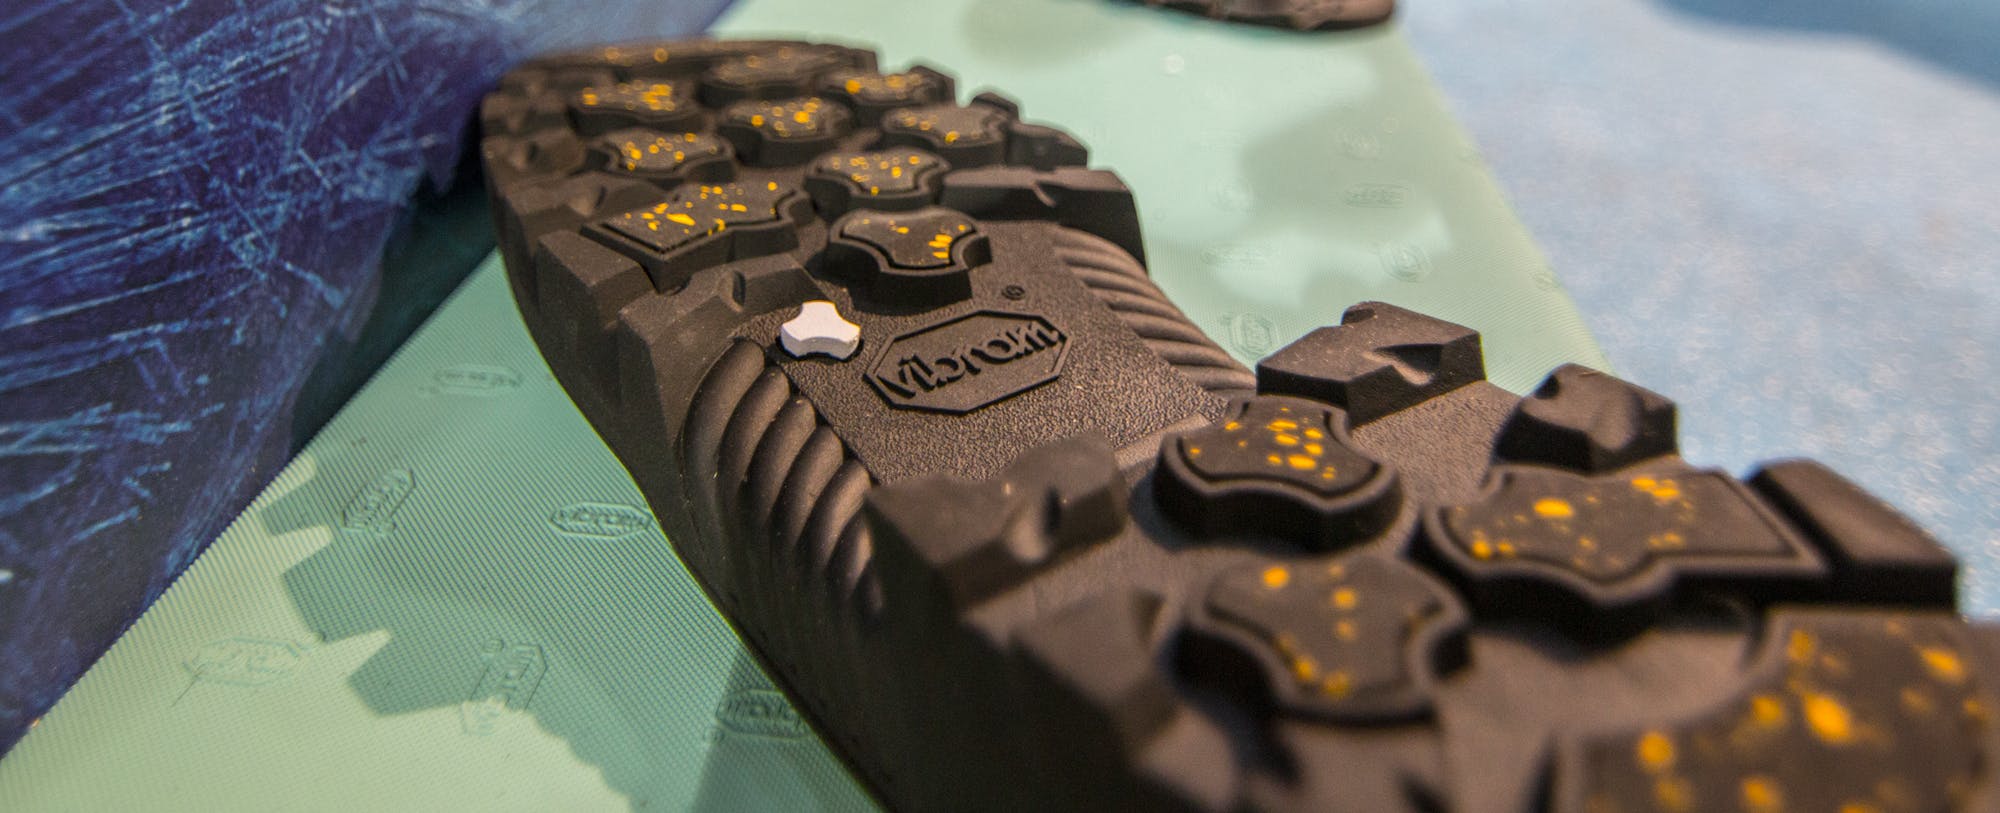 Vibram Gains Traction with Arctic Grip Soles